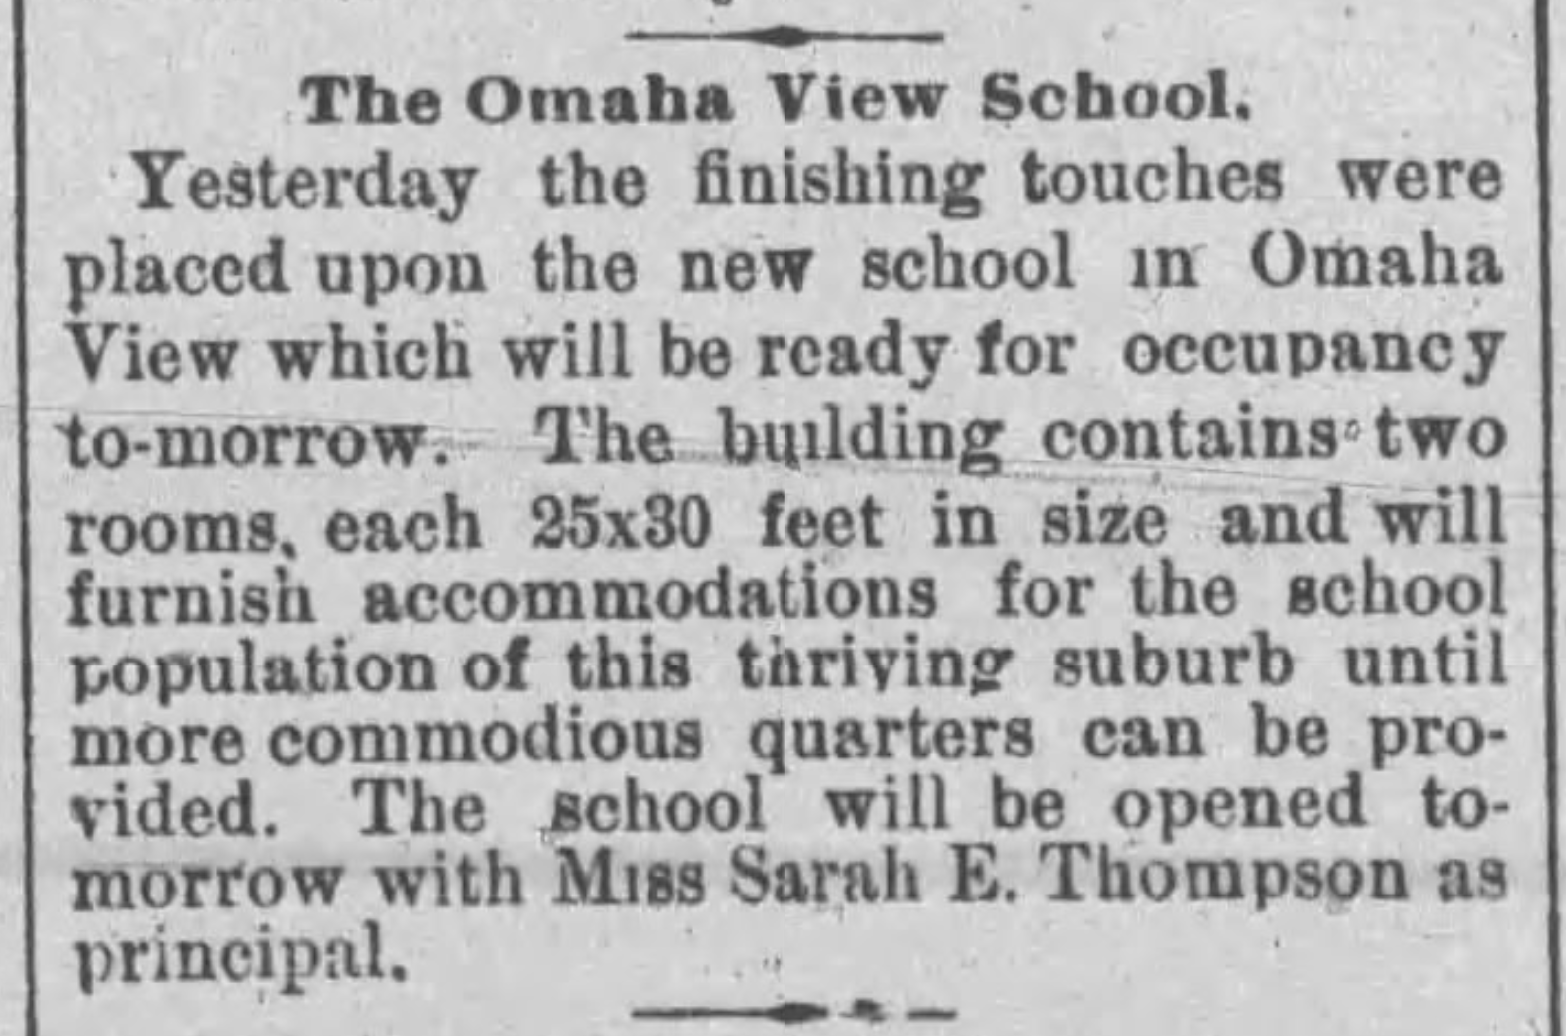 This is a November 1886 article highlighting the opening of the Omaha View School.